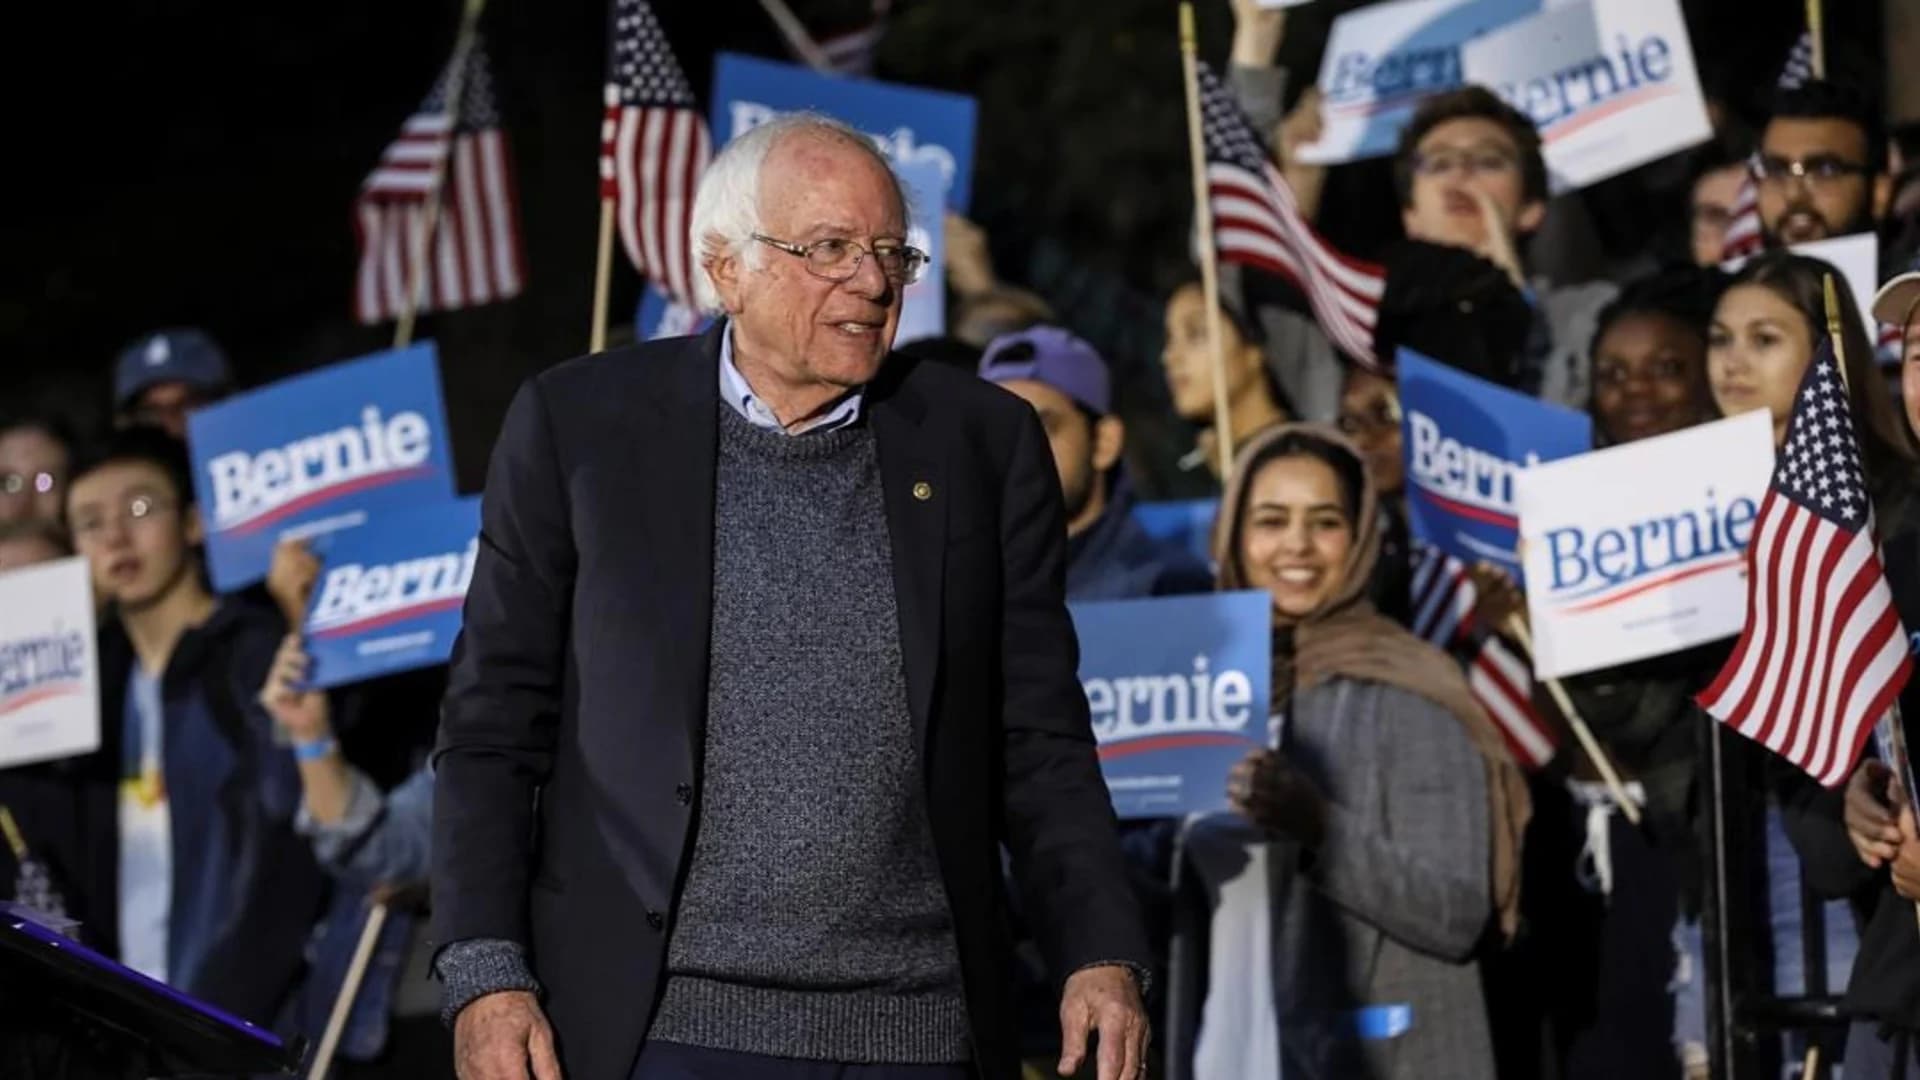 Campaign: Bernie Sanders had heart attack, released from hospital